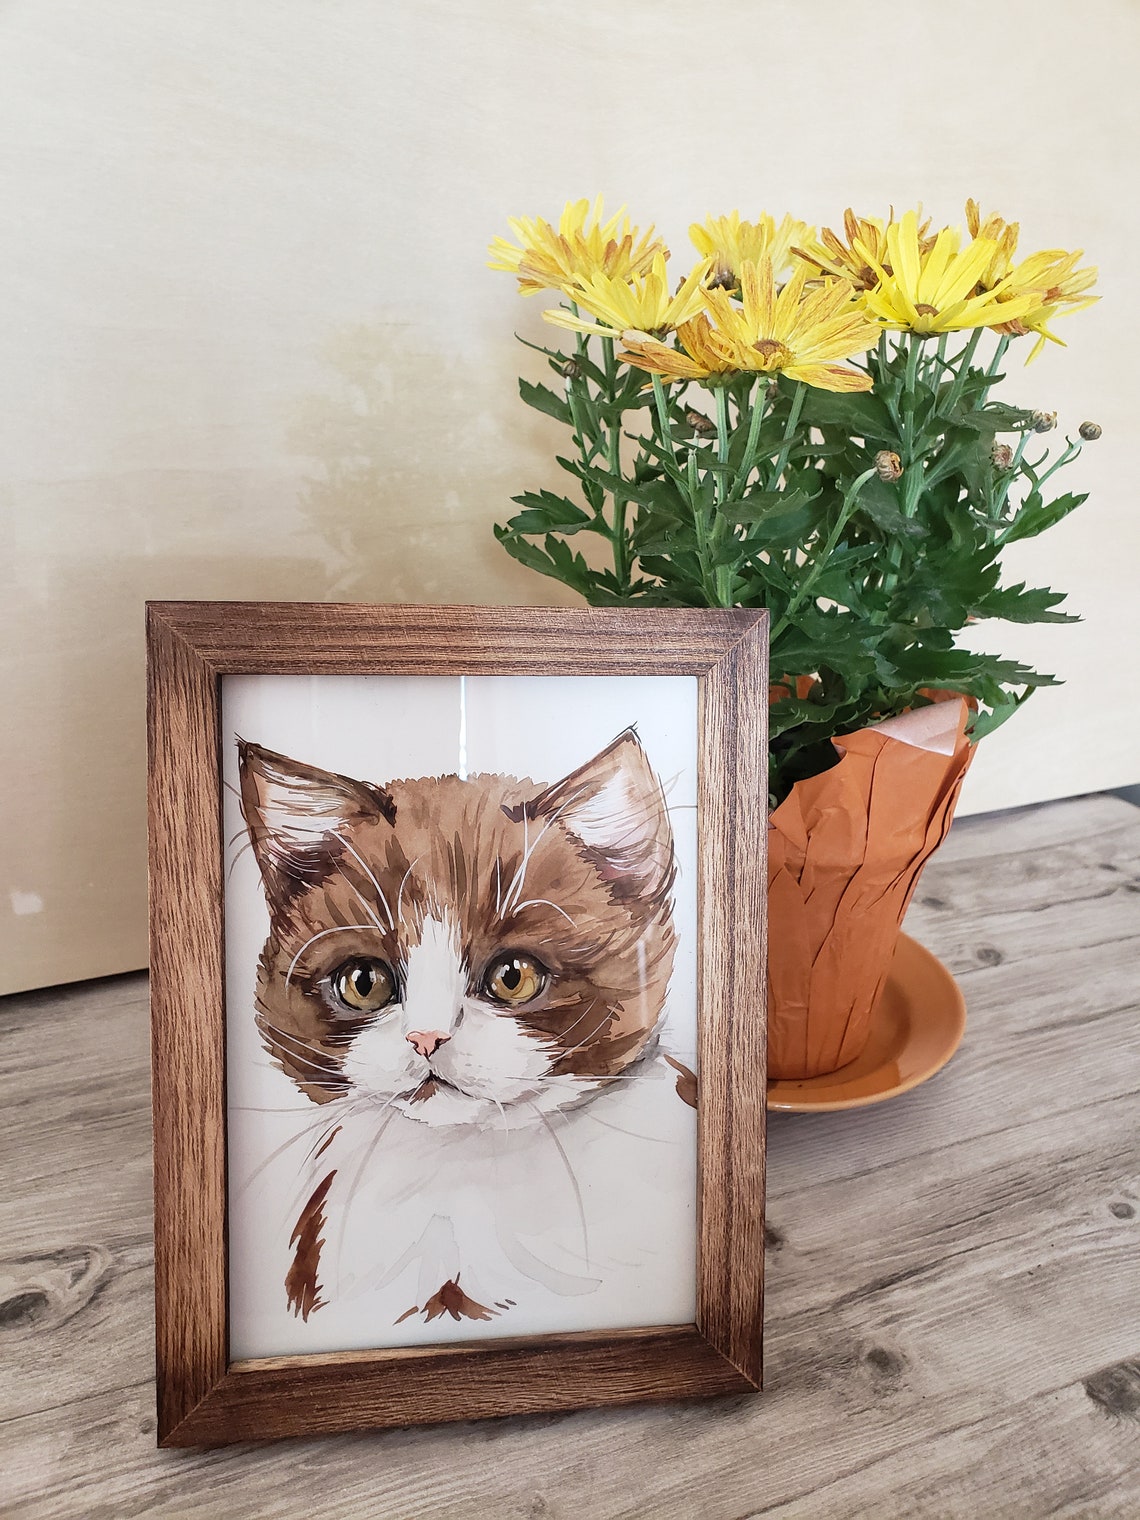 Pet Portrait From Photo Watercolor Handmade | Etsy